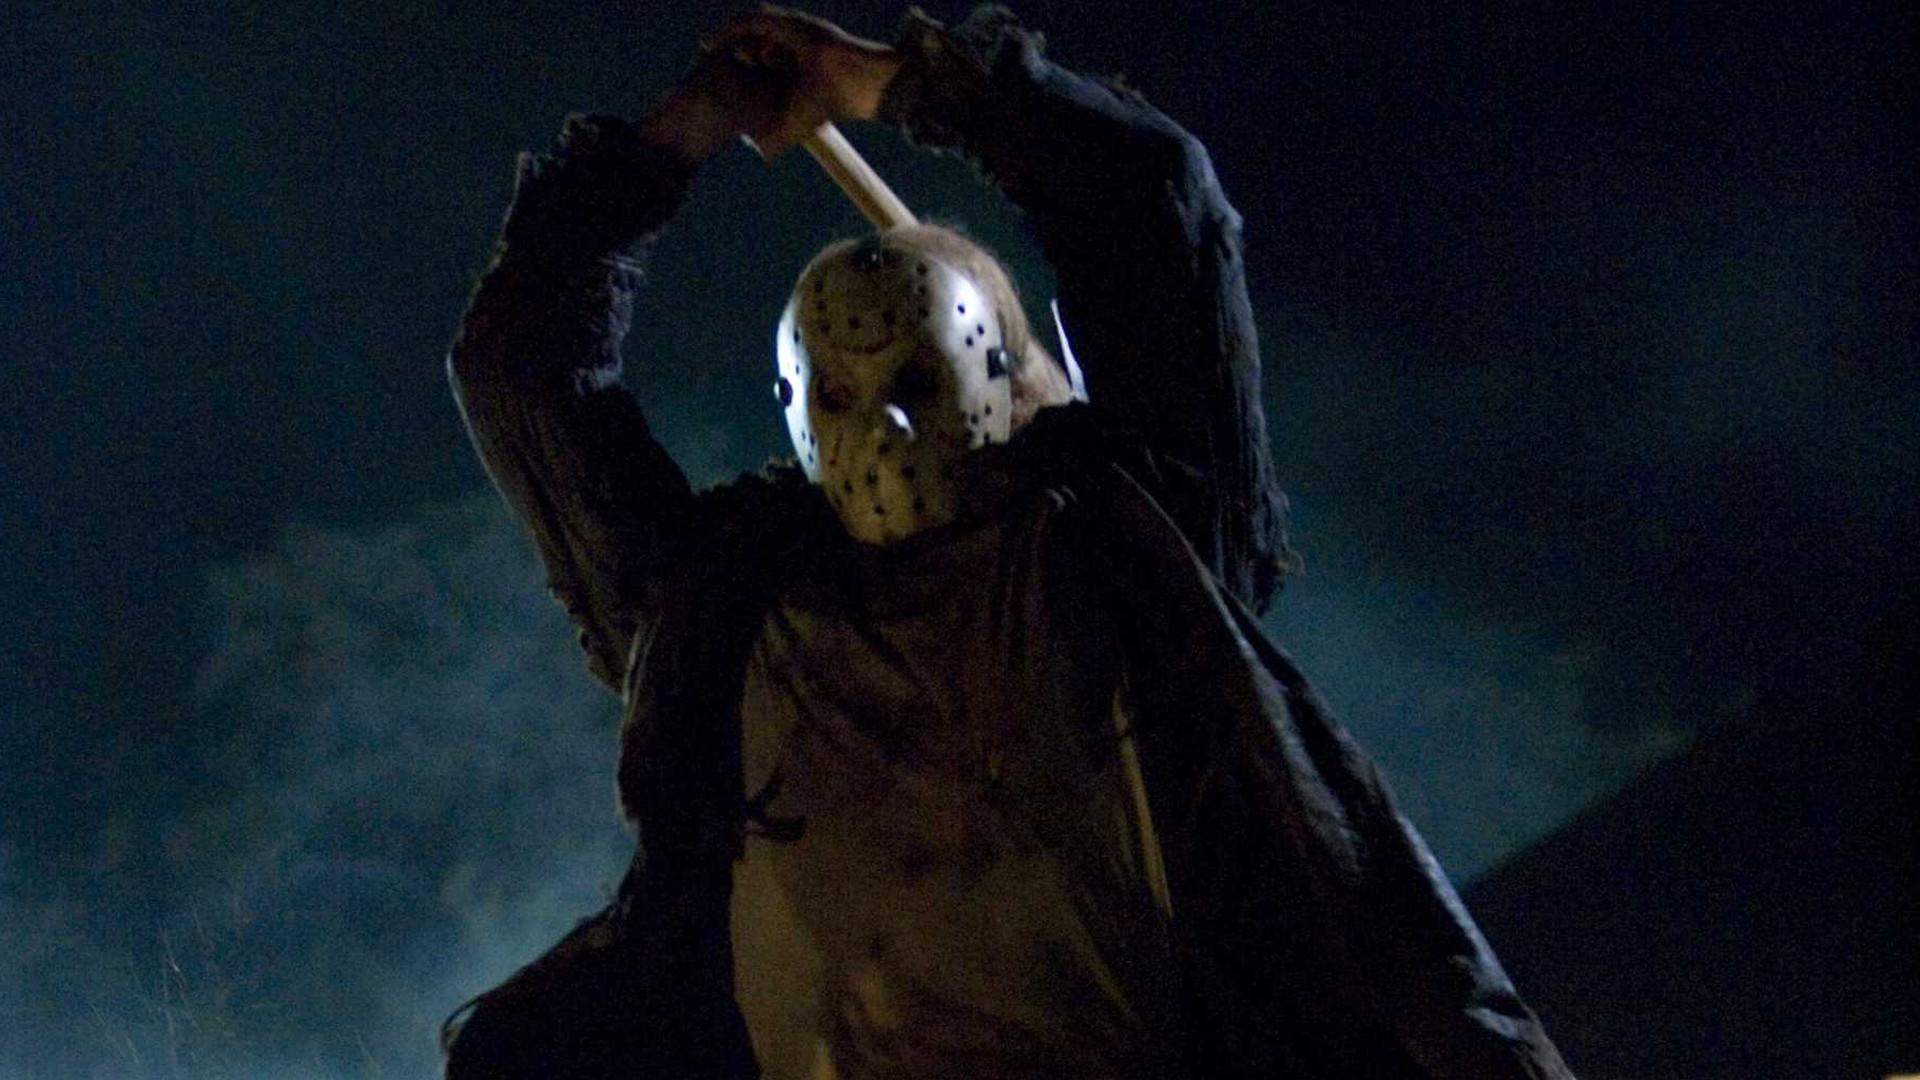 Friday the 13th Reboot